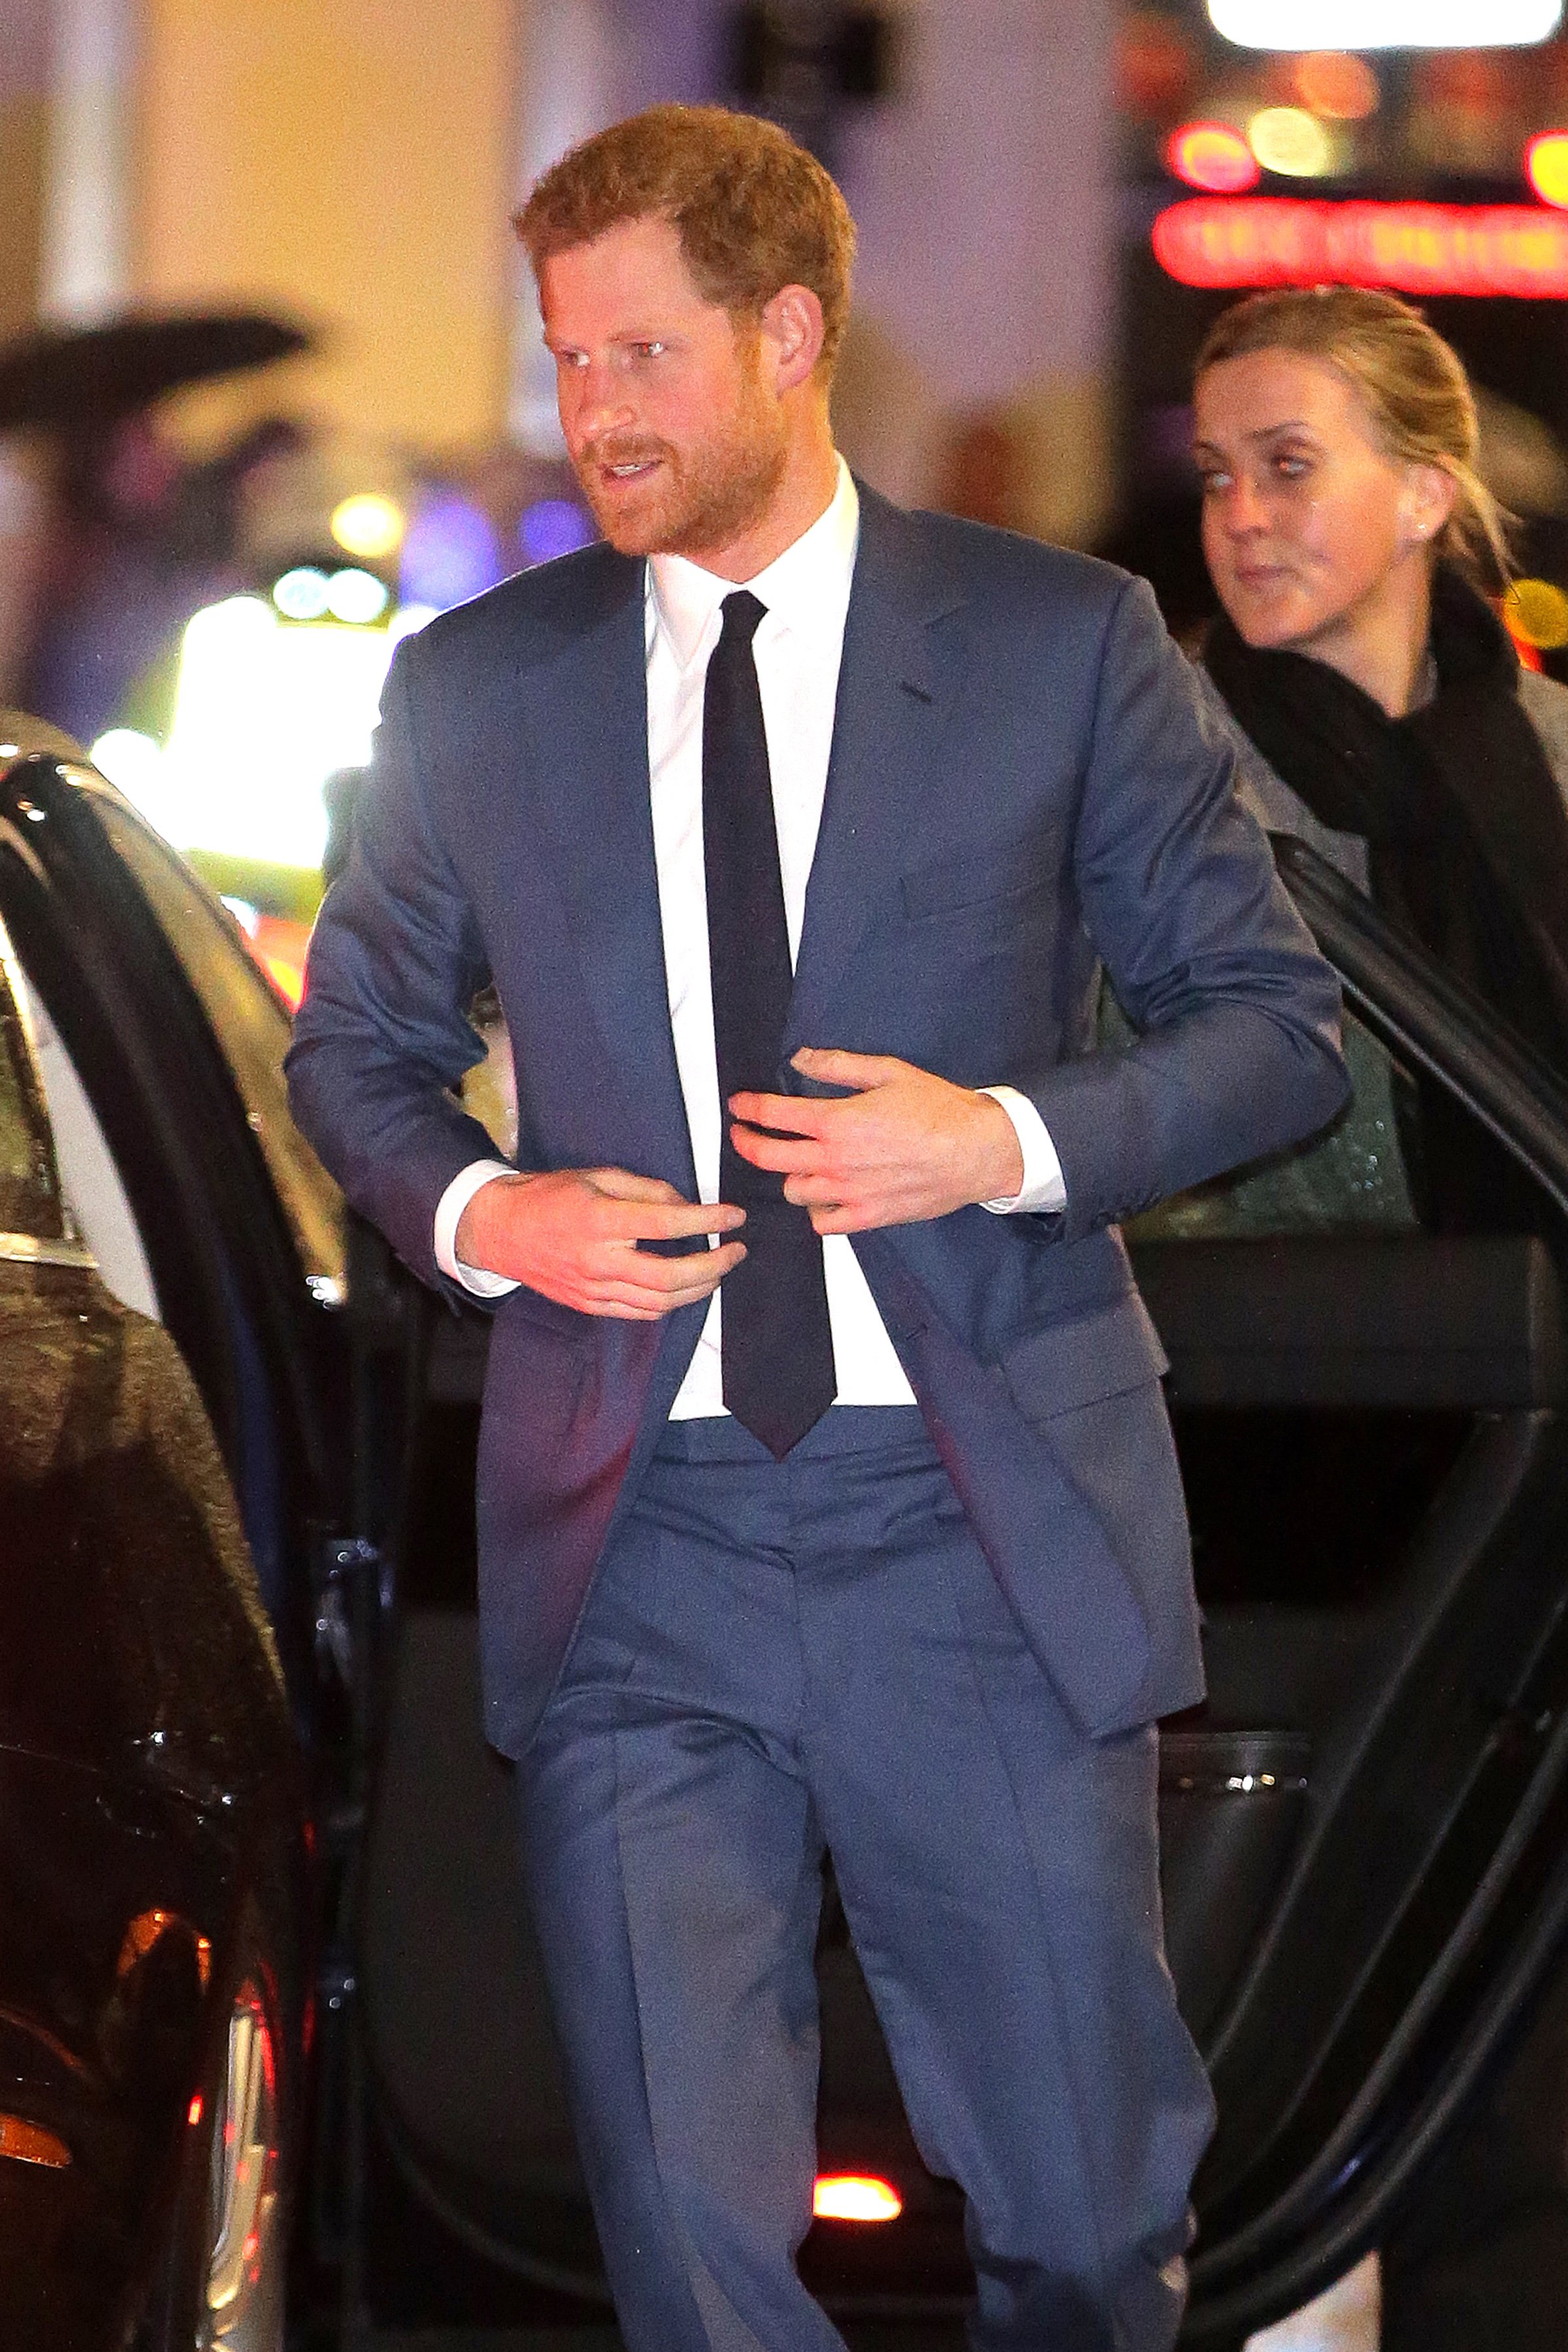 Prince Harry arrives for the Endeavour Fund Awards Ceremony at Goldsmiths Hall on February 1, 2018, in London, England. | Source: Getty Images